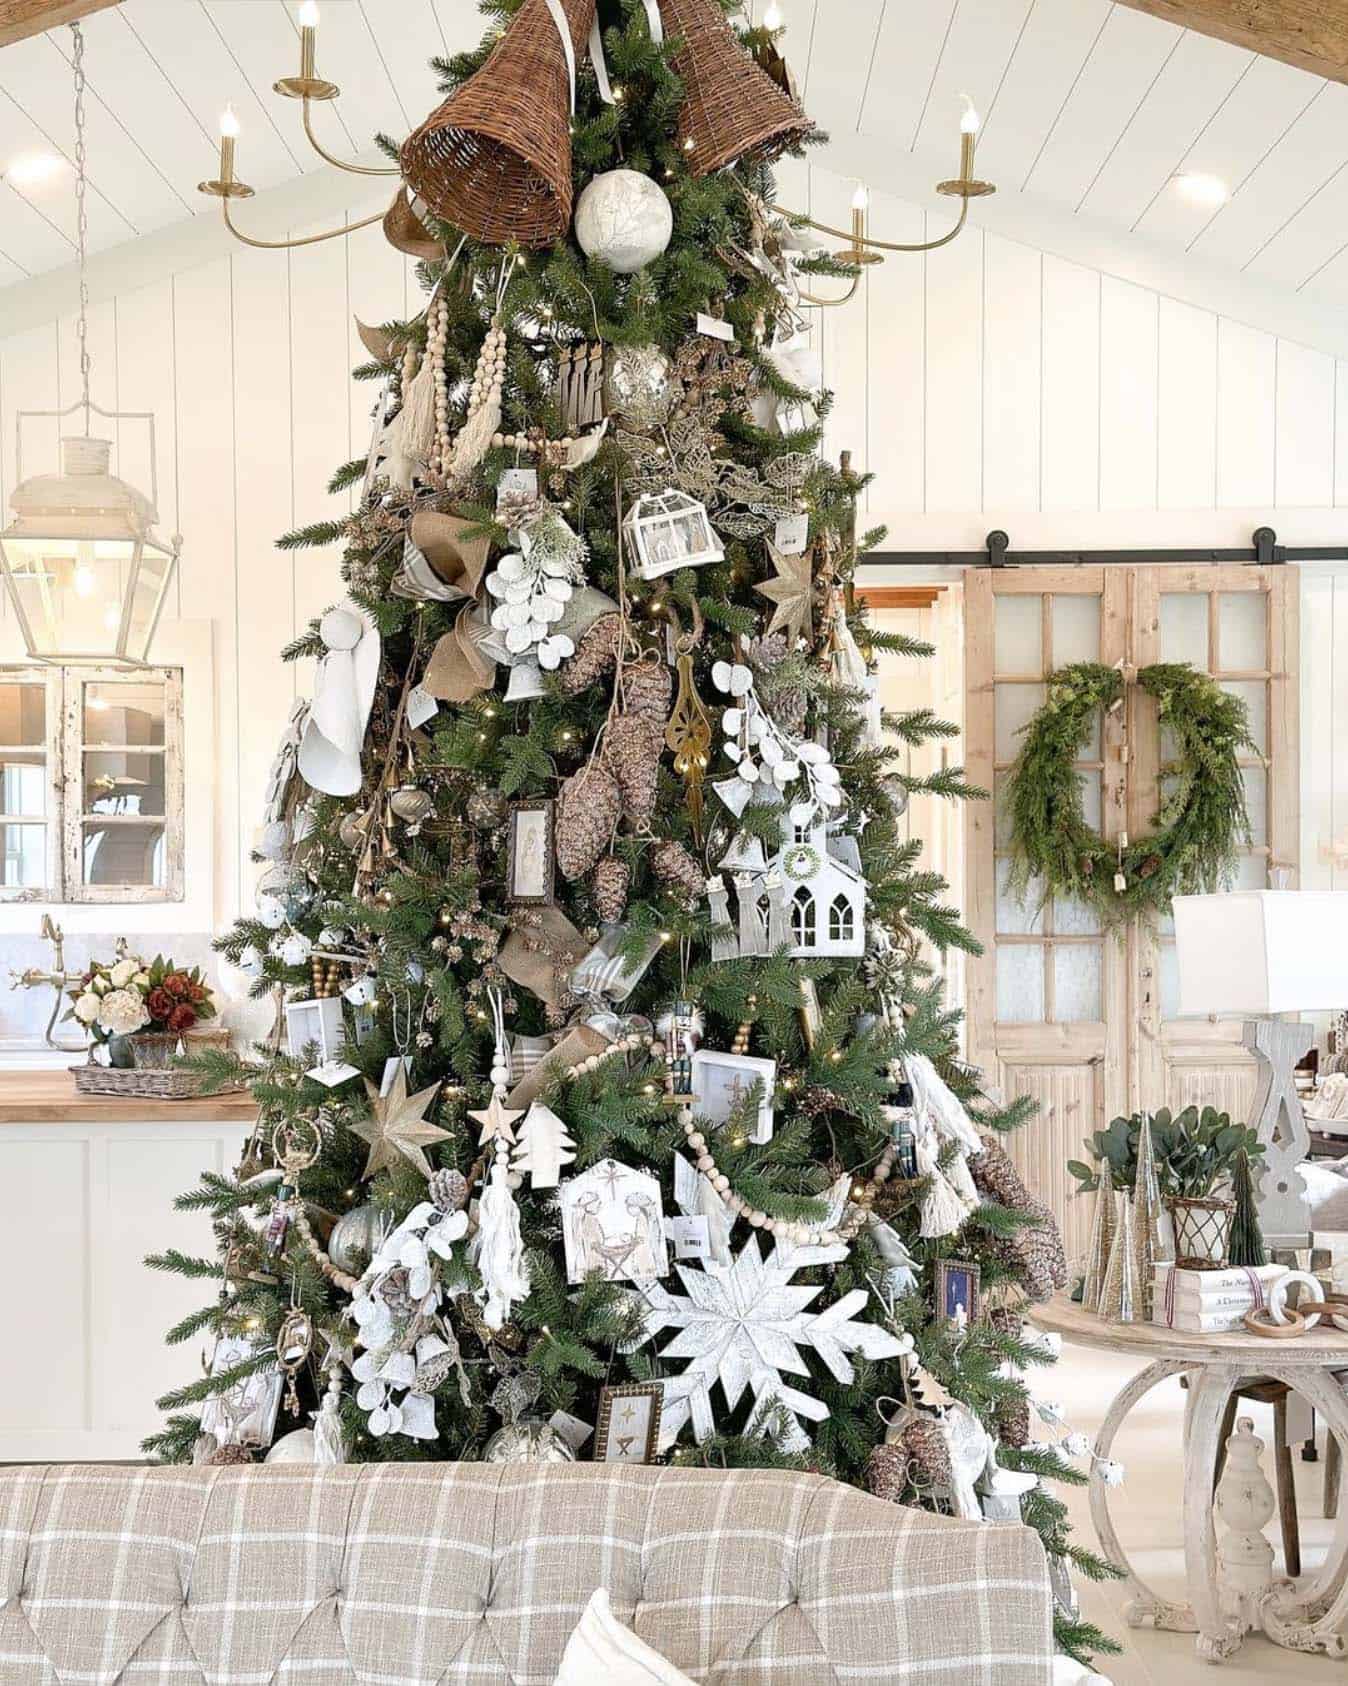 rustic Christmas tree with nativity ornaments, snowflakes and pinecones